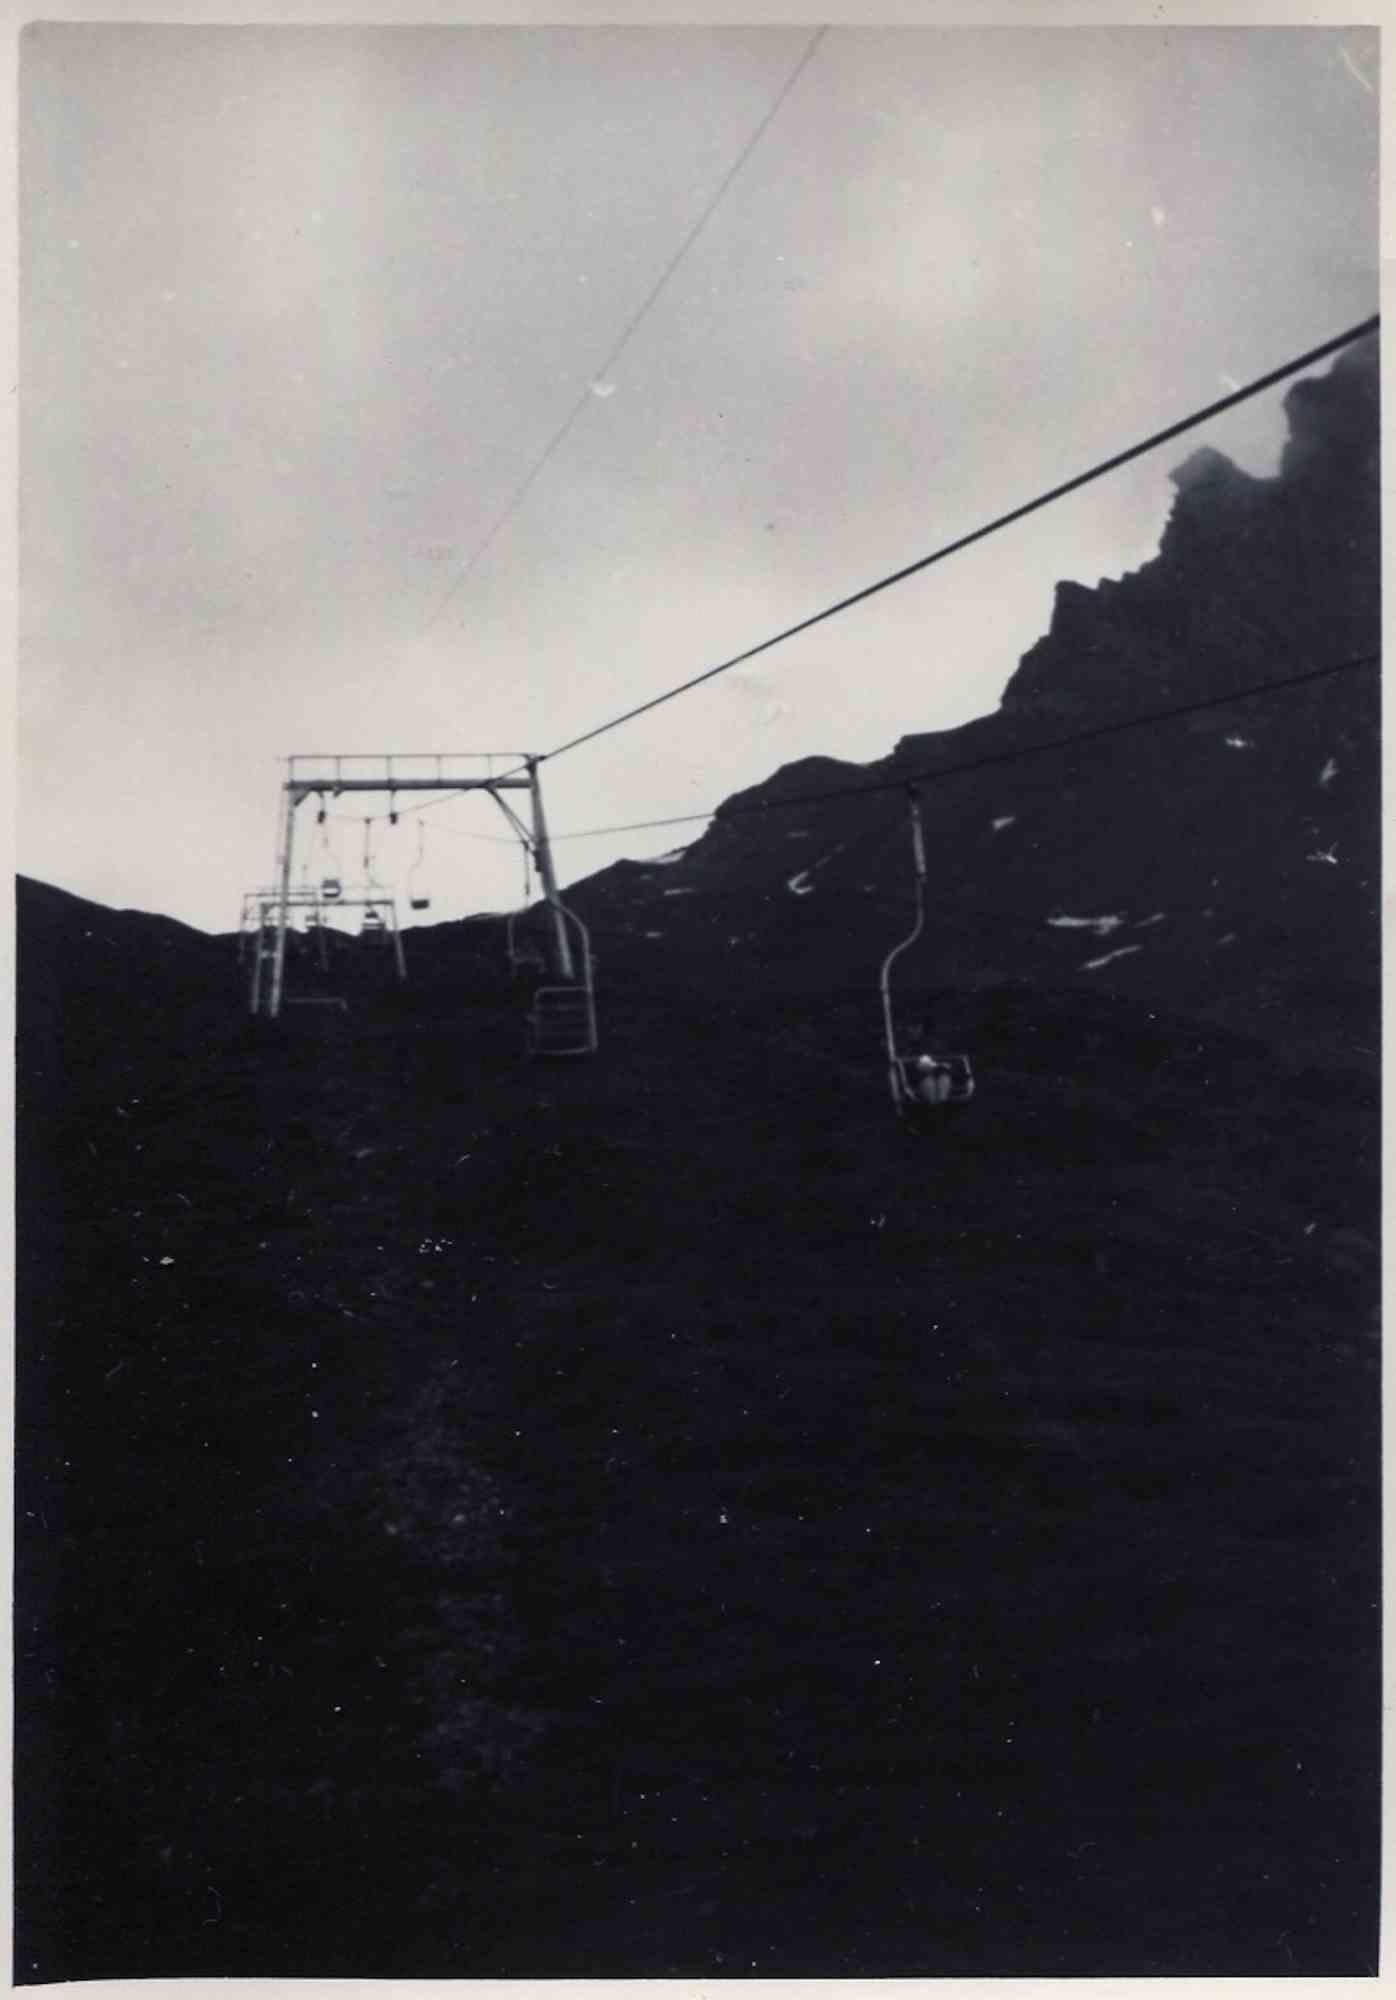 Unknown Landscape Photograph - Old days Photo -Twilight in the Mountain - Vintage Photo - Mid-20th Century